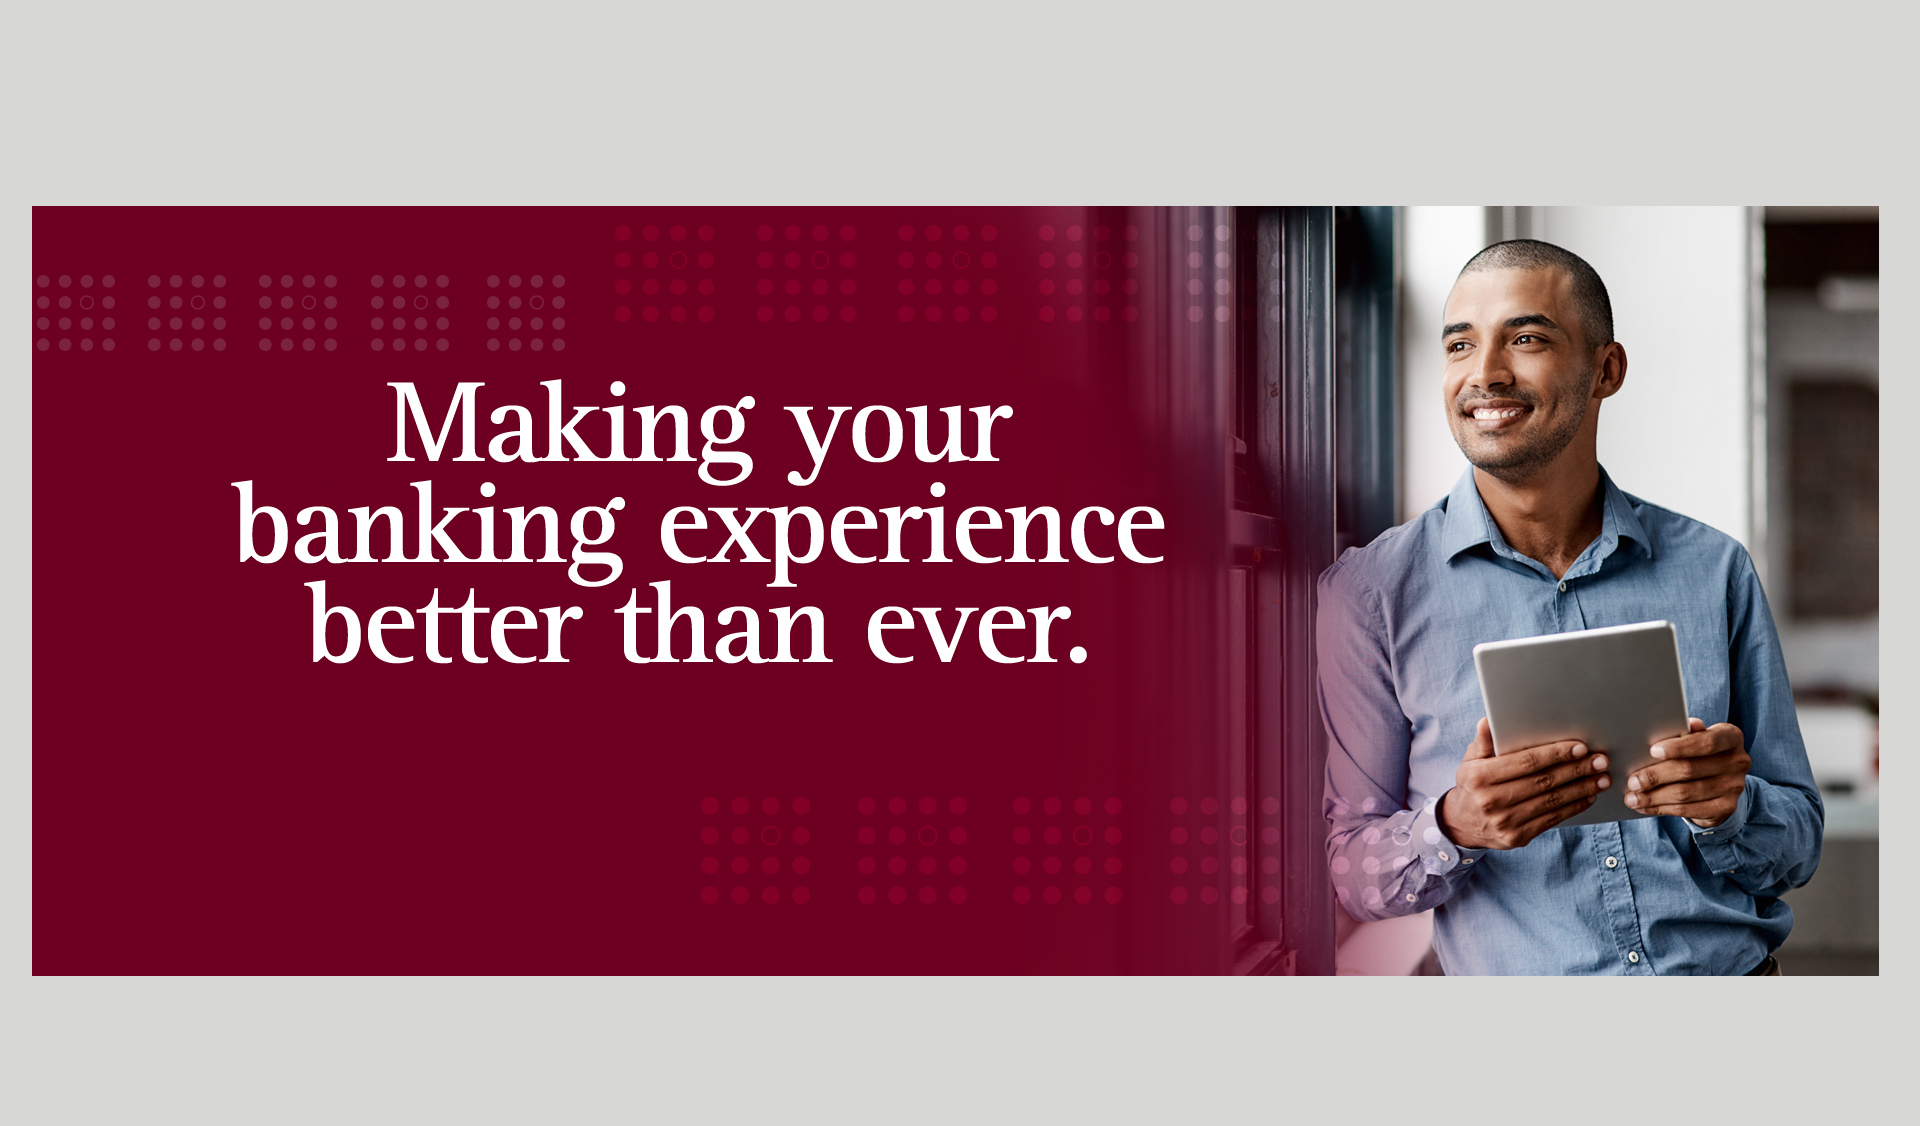 Making your banking experience better than ever.